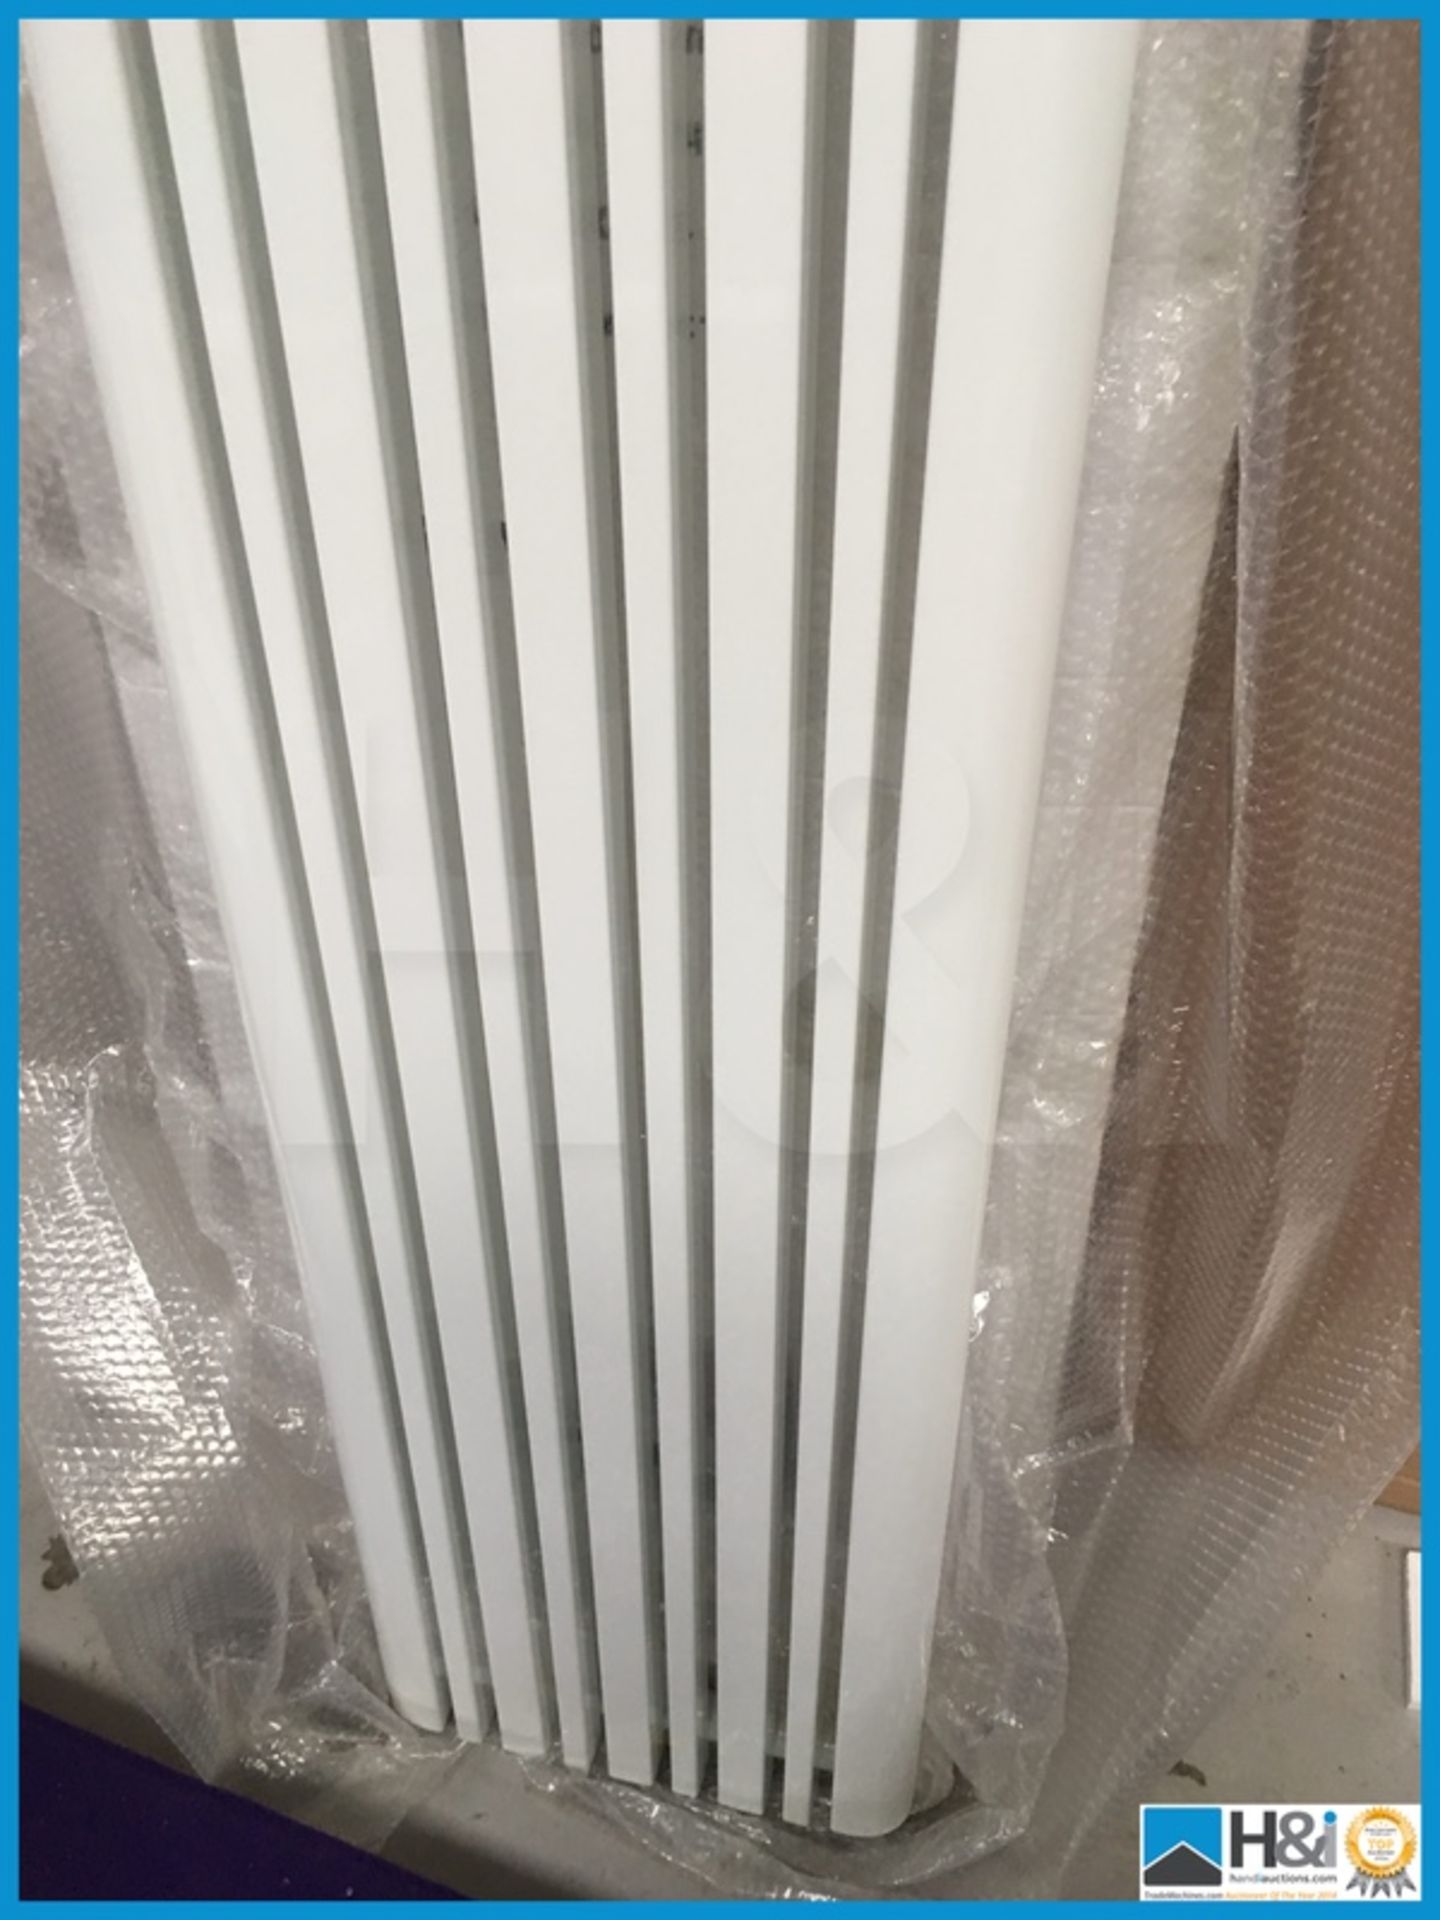 Stunning designer Phoenix Tower radiator 1800x423 finished in white RA115. New and boxed. - Image 2 of 3